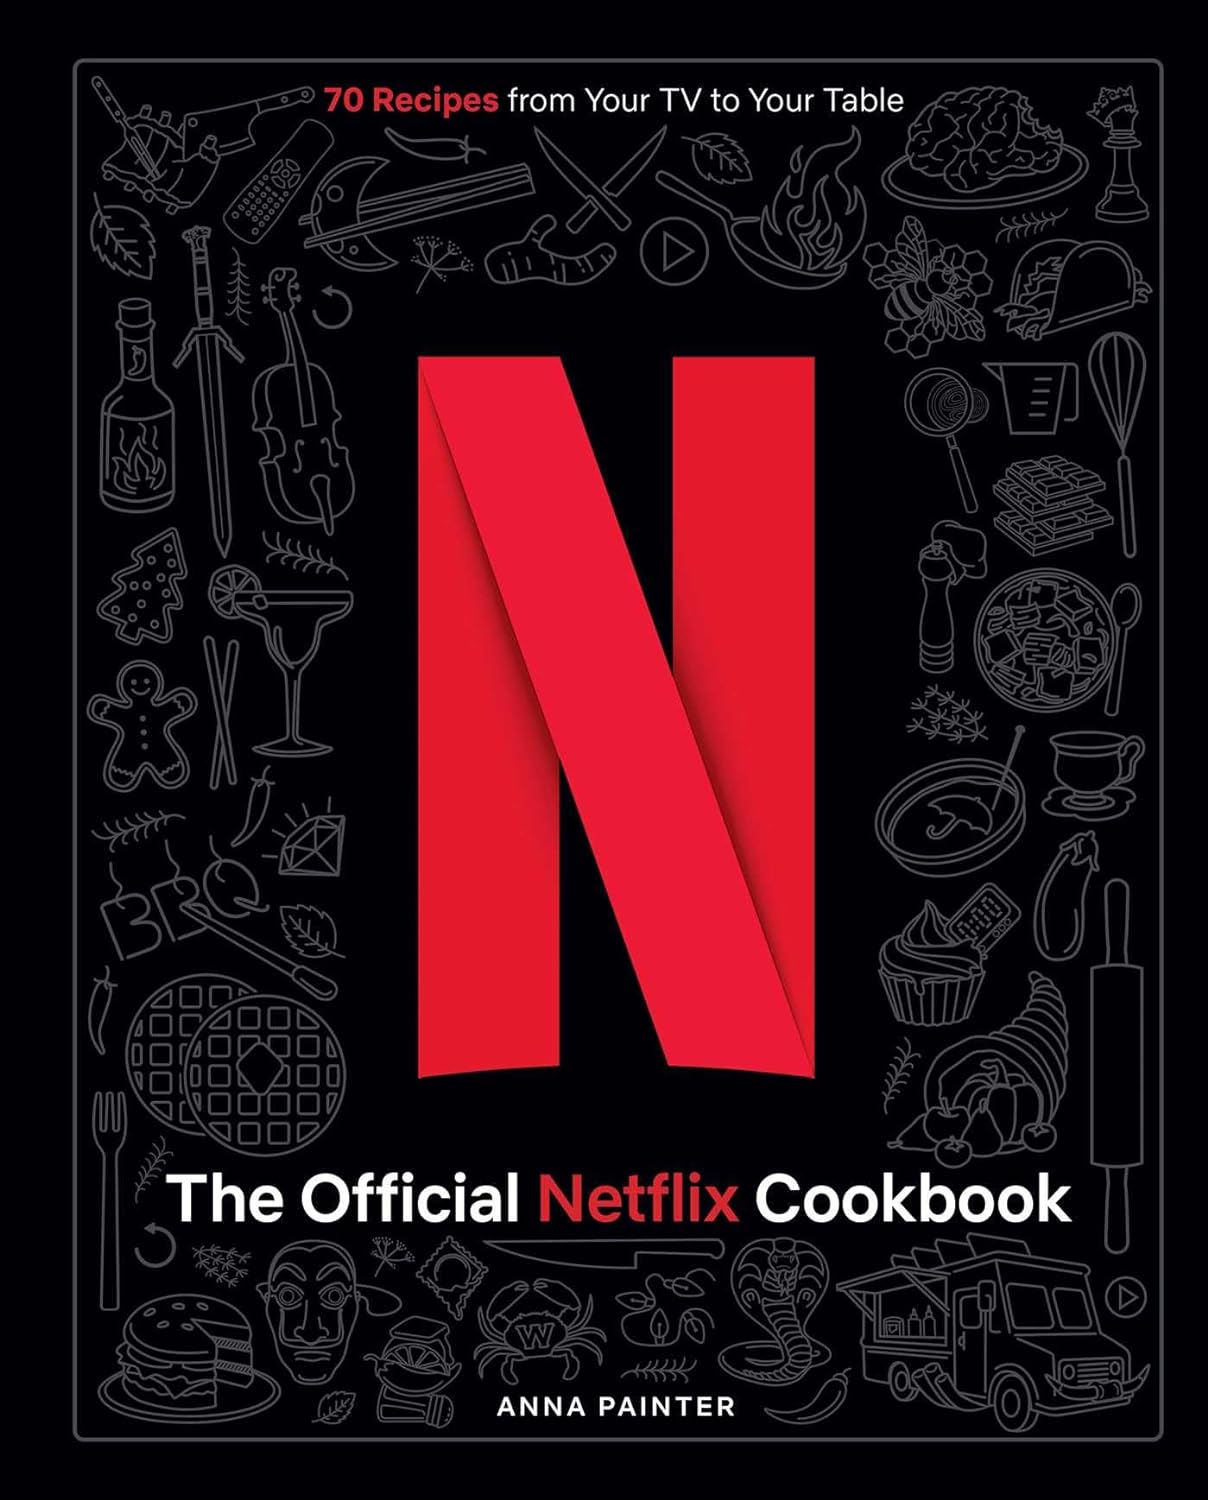 THE OFFICIAL NETFLIX COOKBOOK: 70 RECIPES FROM YOUR TV TO YOUR TABLE (HC)